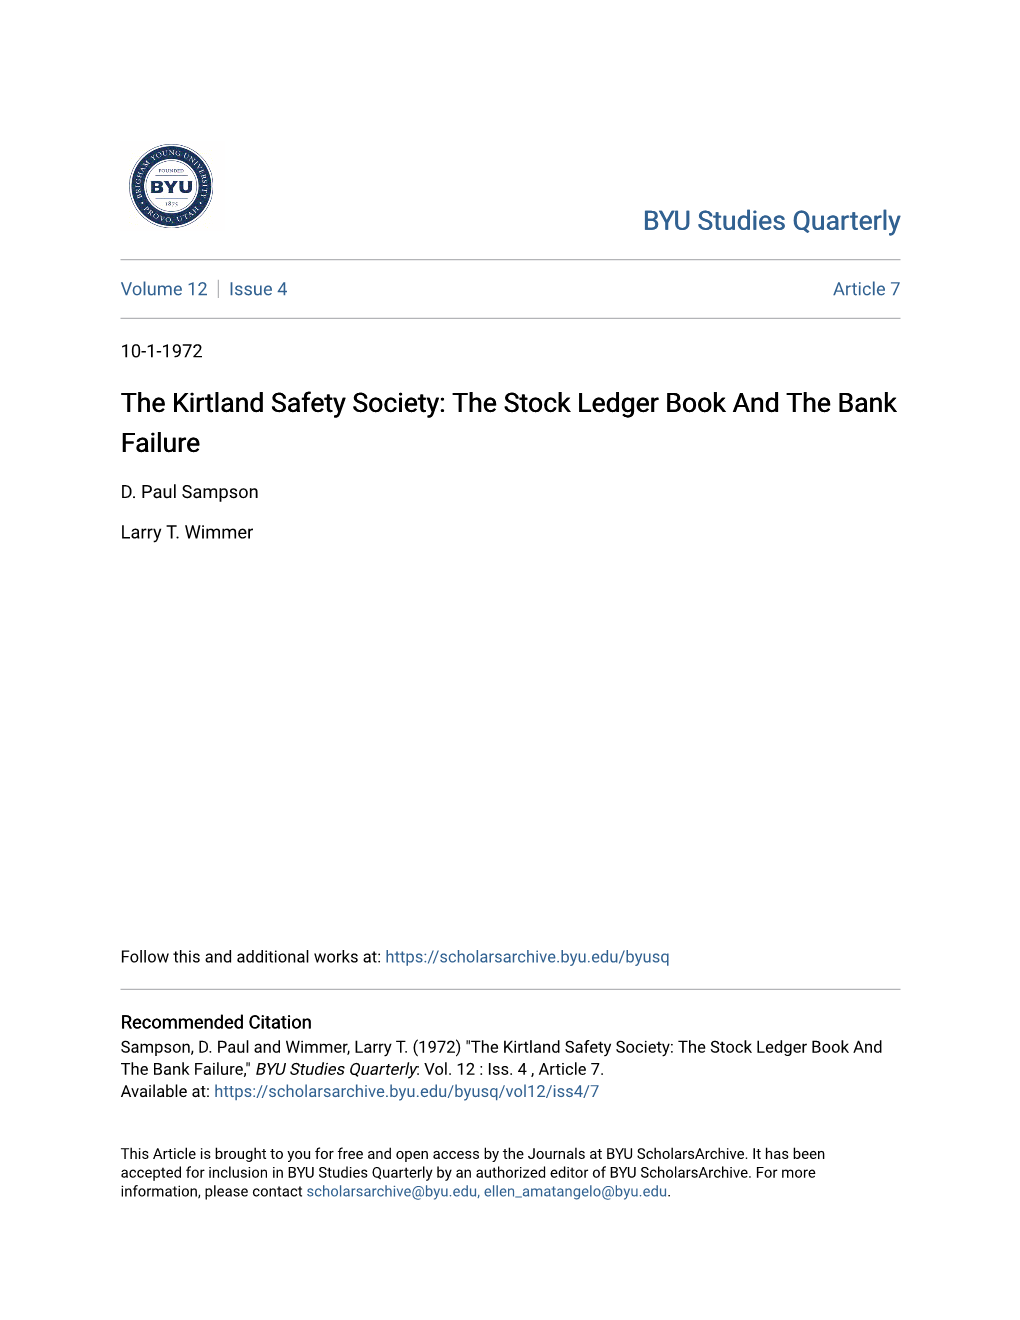 The Kirtland Safety Society: the Stock Ledger Book and the Bank Failure